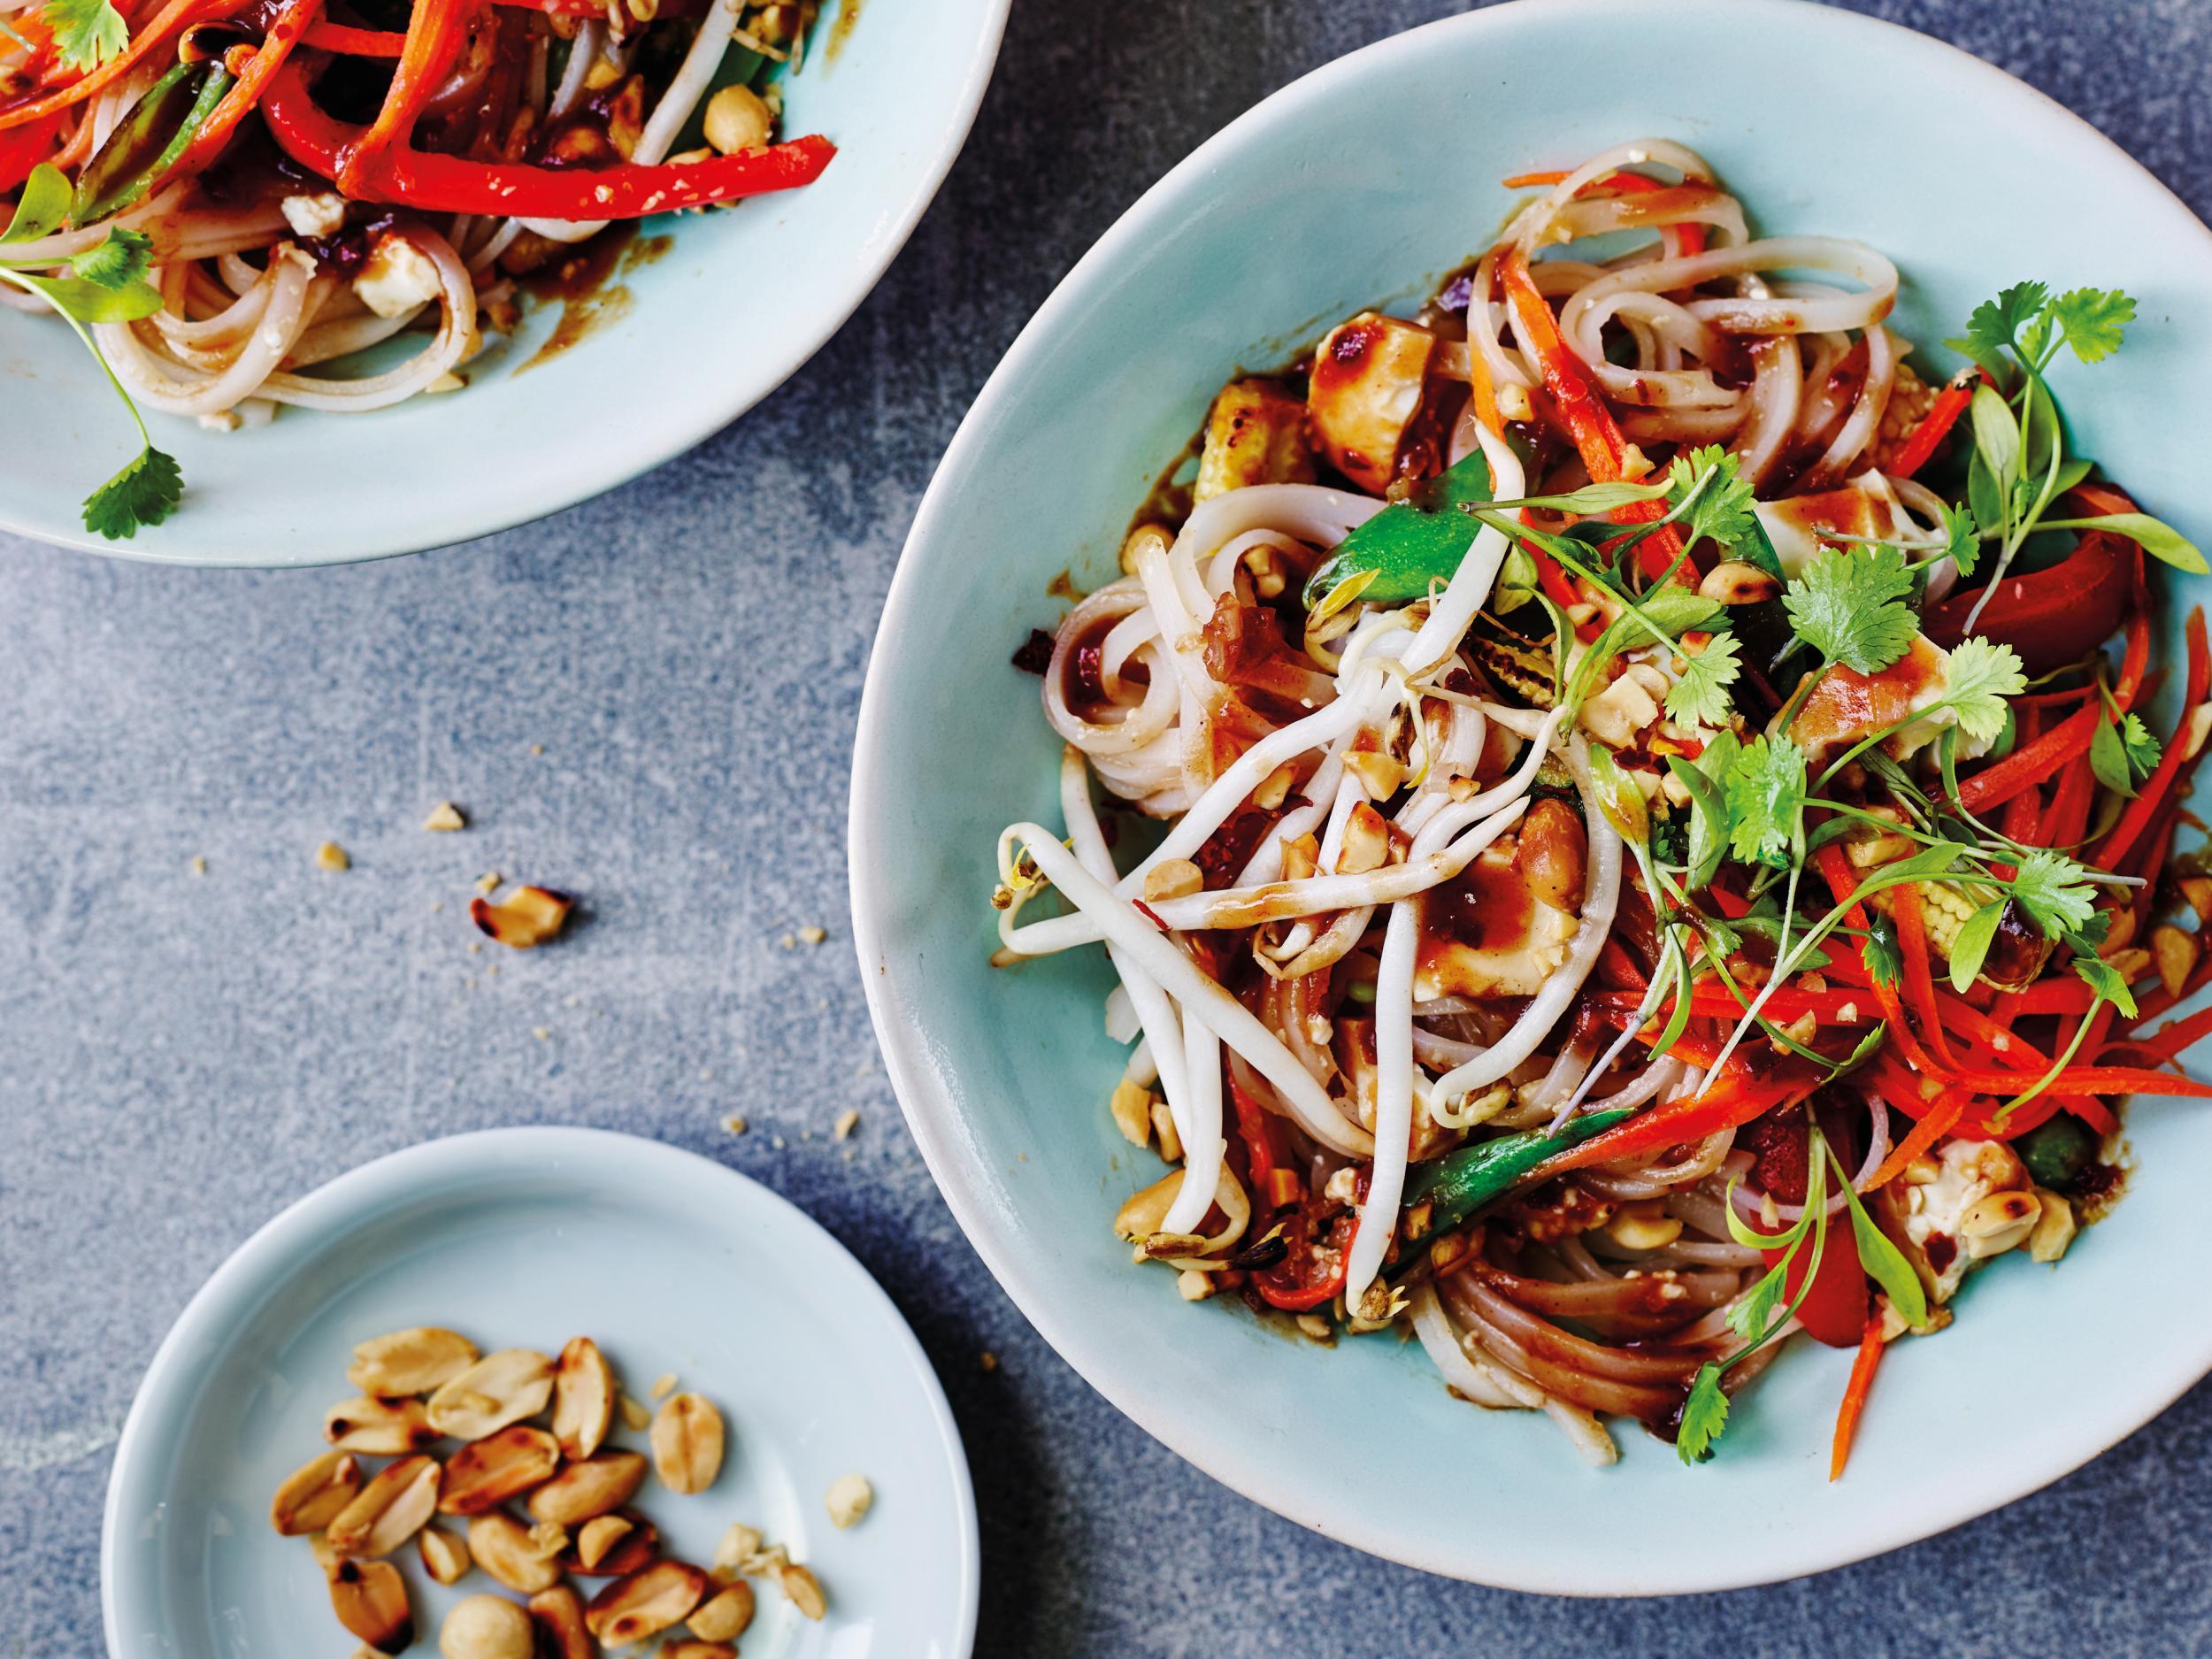 A mouth-watering tofu Pad Thai